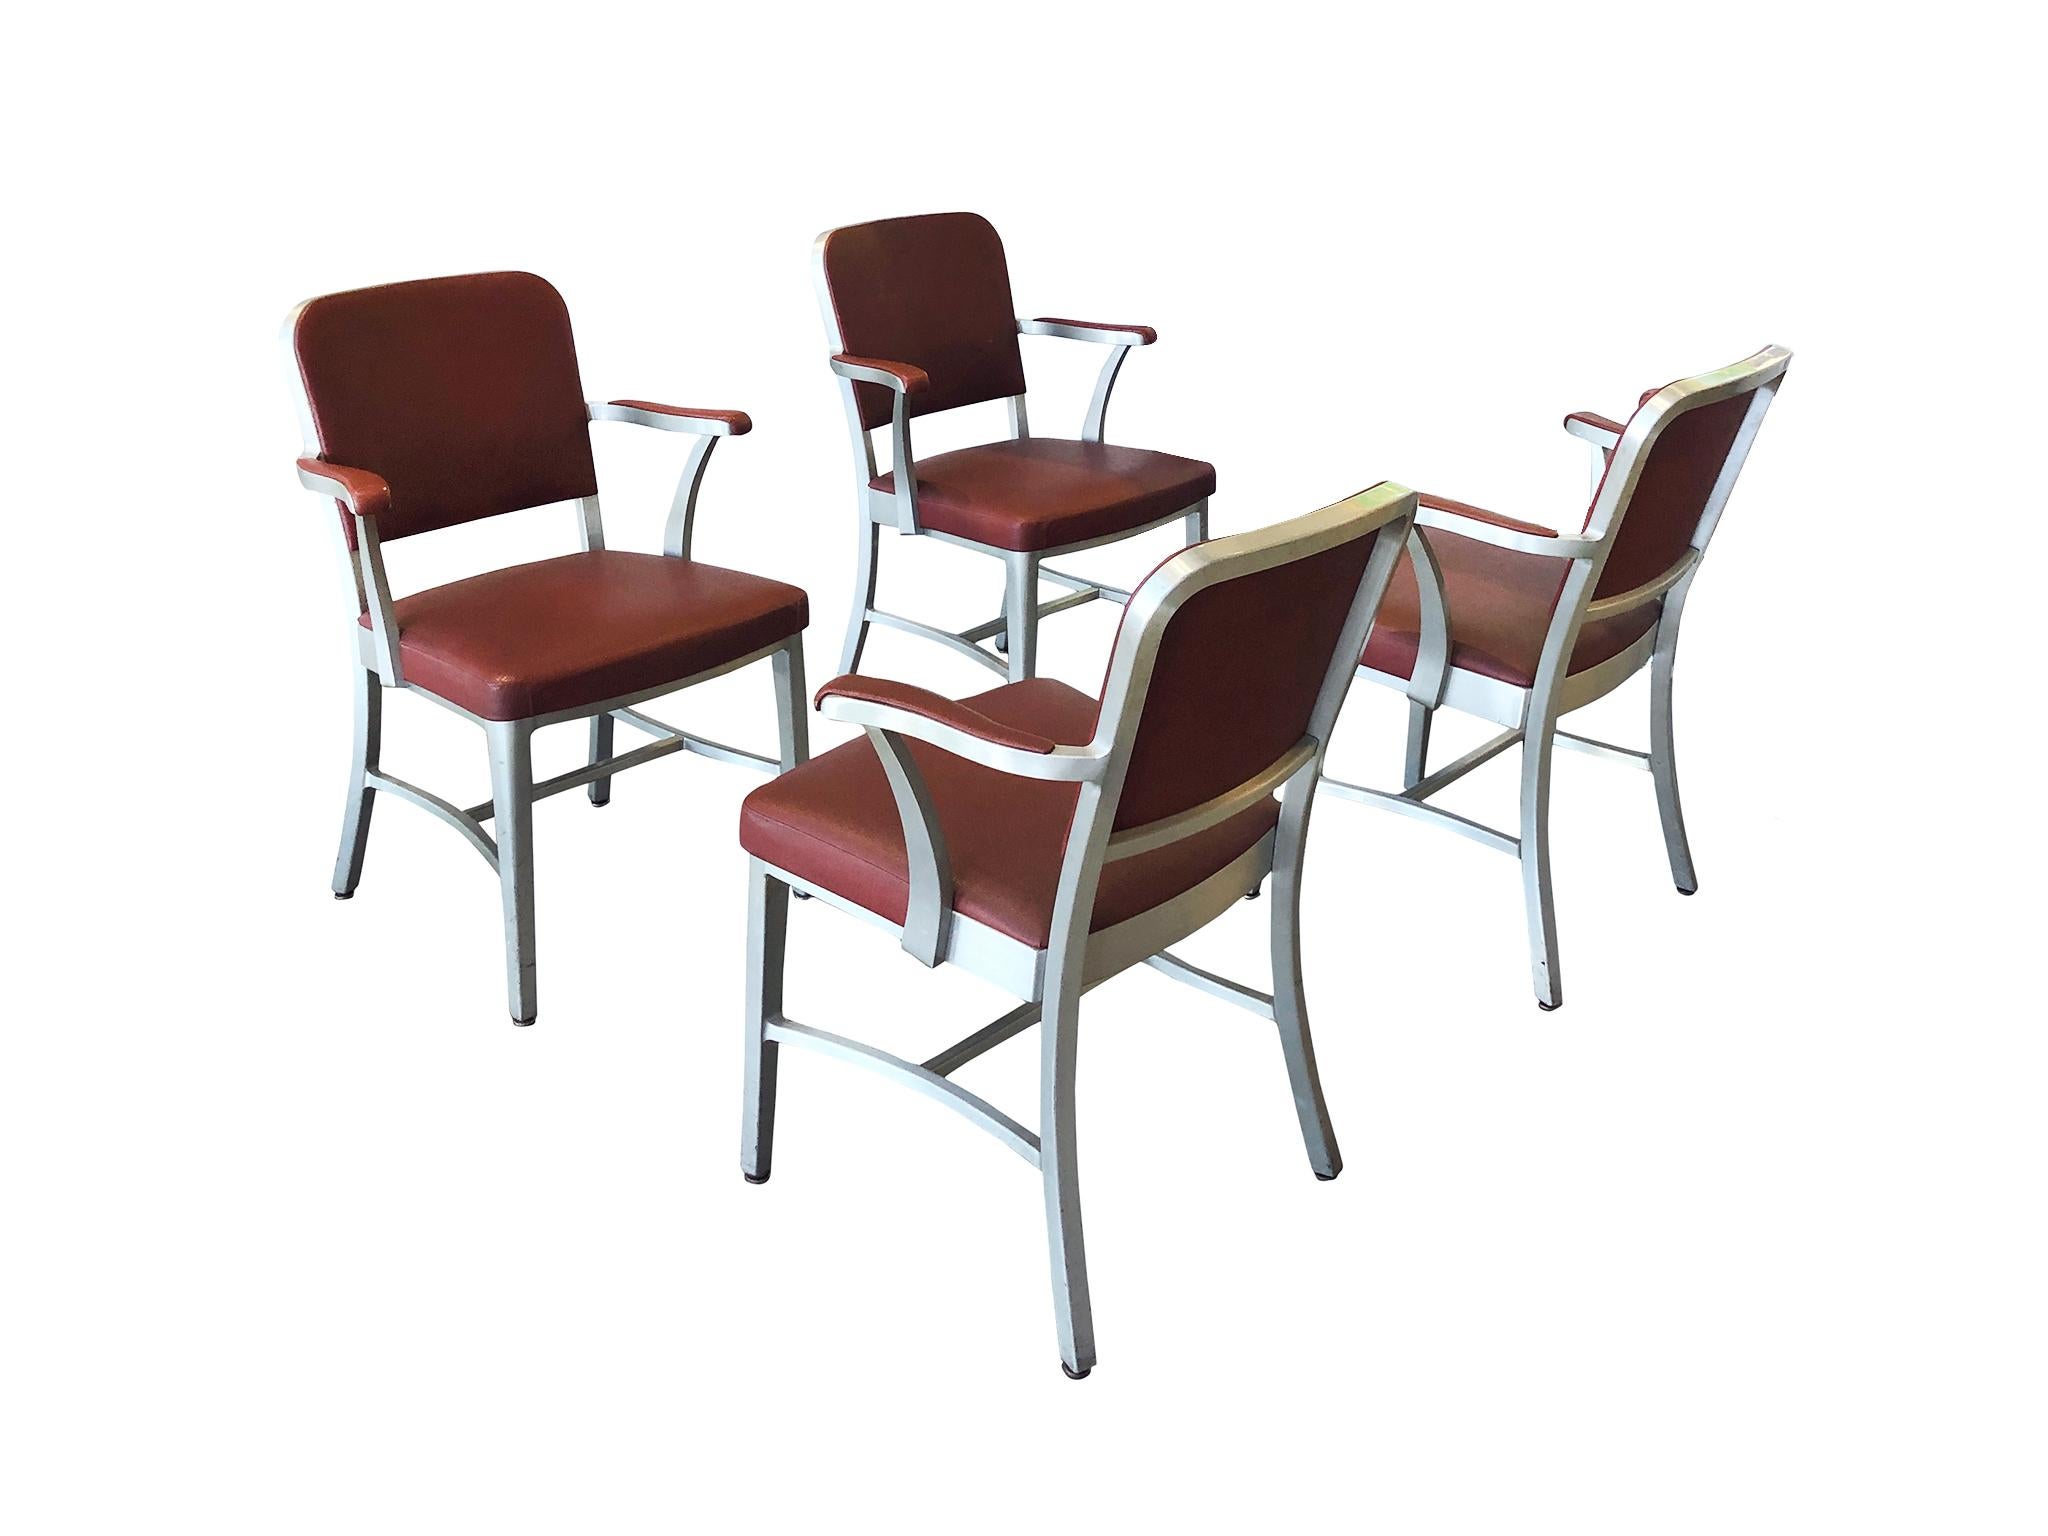 A set of 4 Classic midcentury armchairs manufactured by The General Fireproofing Co. for its line of GoodForm furniture. The chairs are comprised of an aluminum frame and textured vinyl upholstery in a maroon color. The design of these chairs is